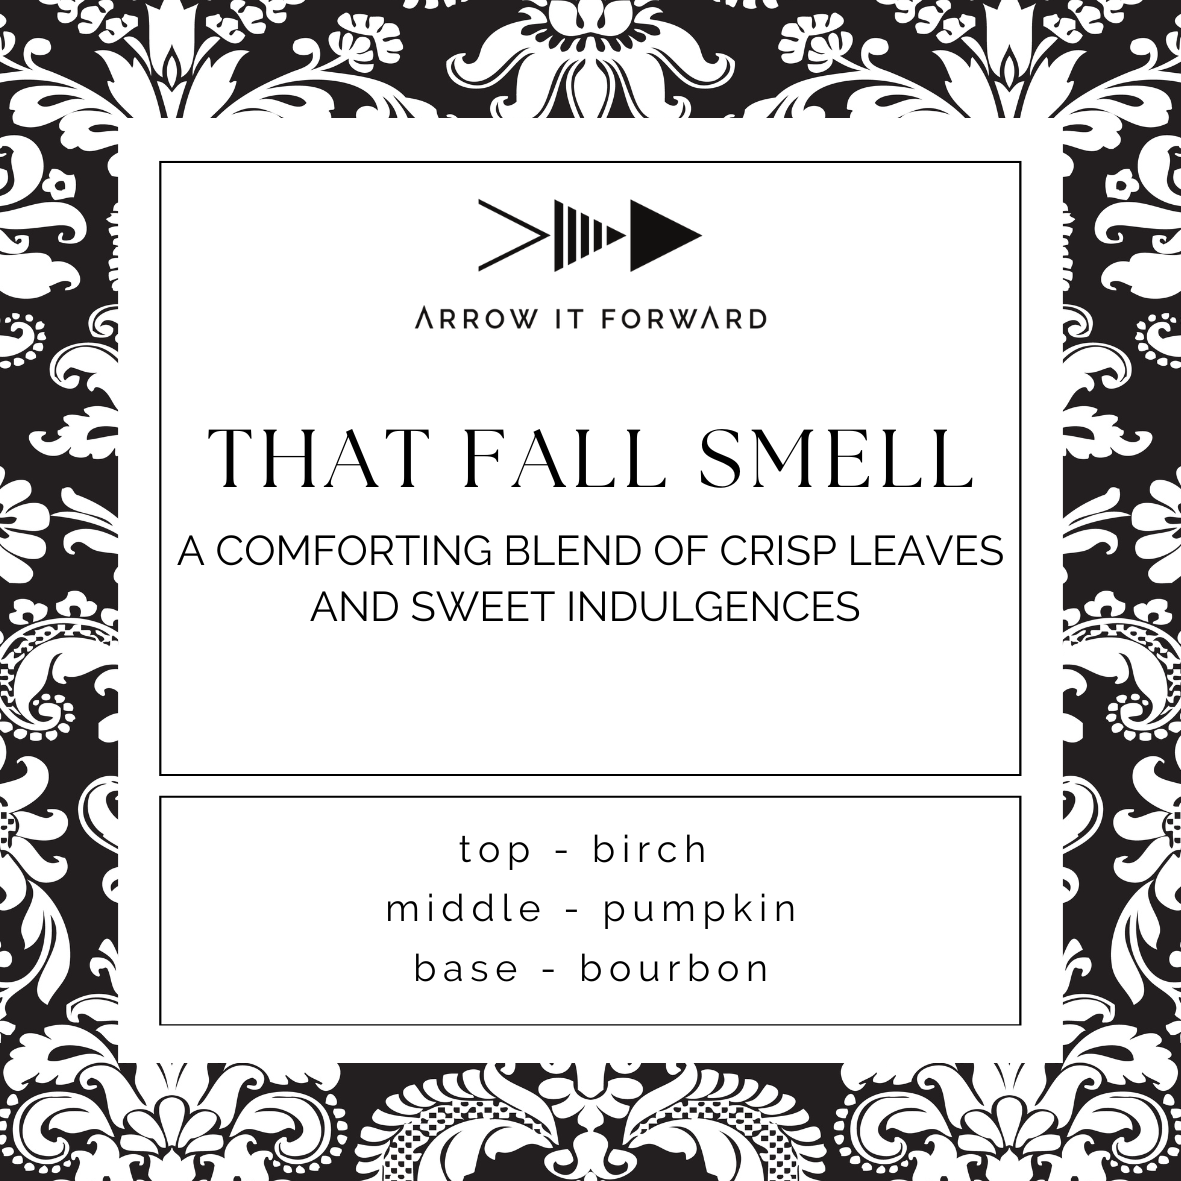 THAT FALL SMELL - 2.5 oz  Soy Wax Melts